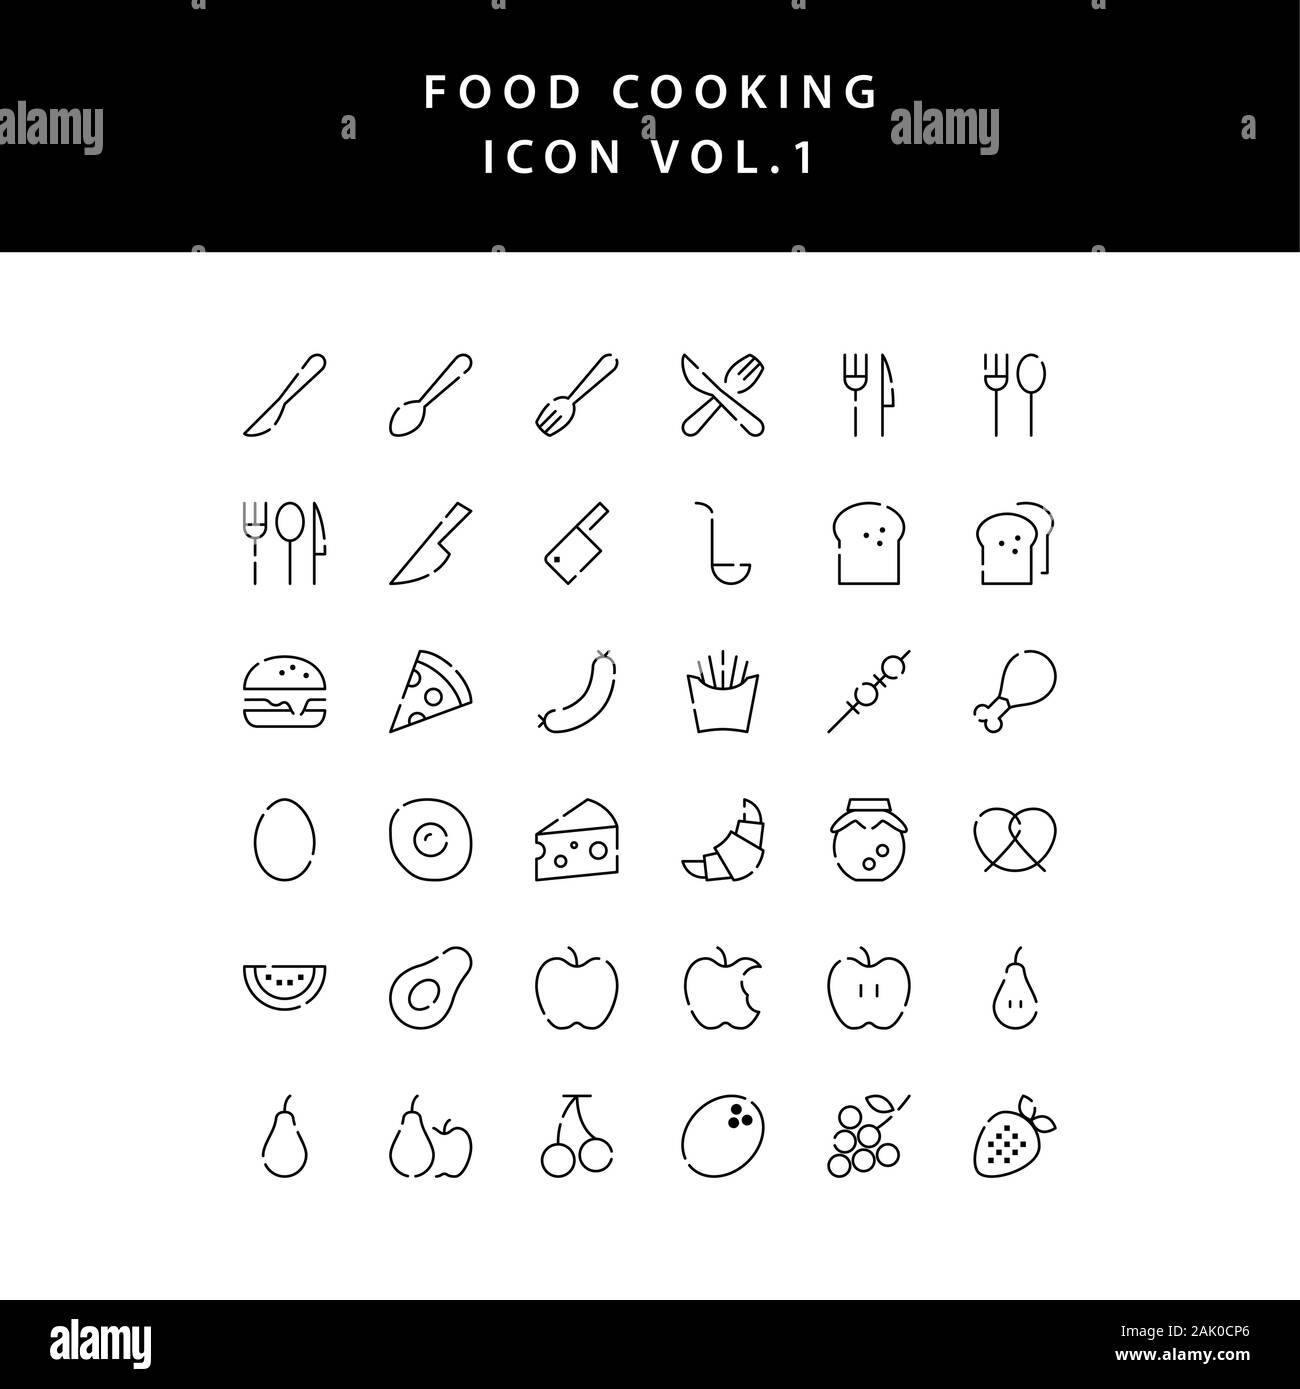 food cooking icon outline set vol 1 Stock Vector